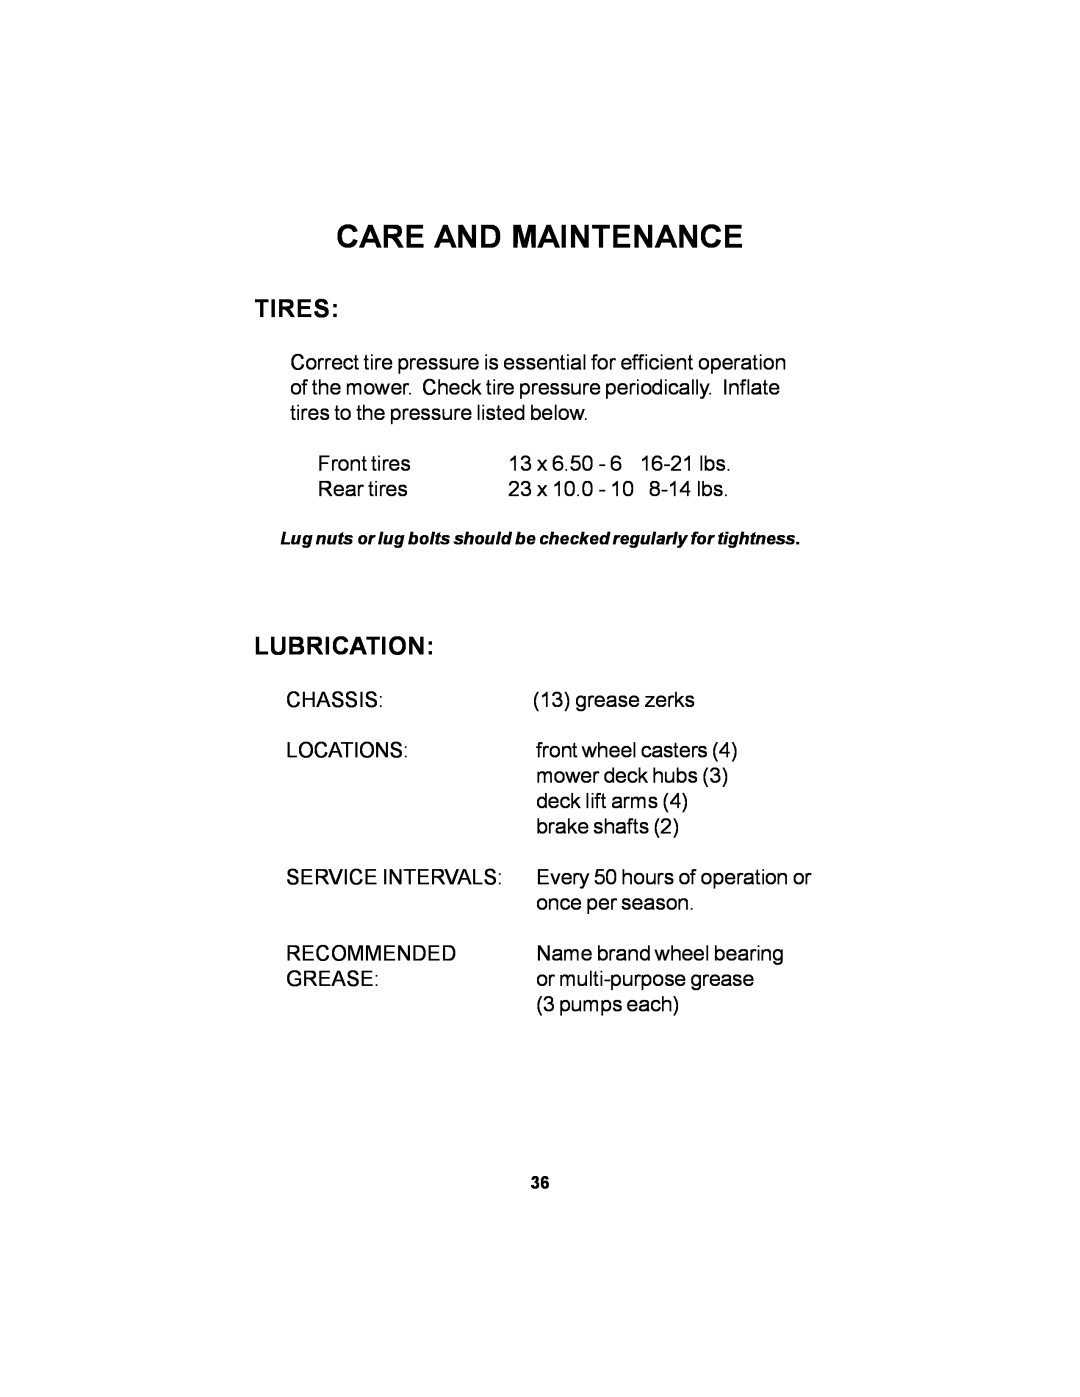 Dixon 18626-106 manual Tires, Lubrication, Care And Maintenance 